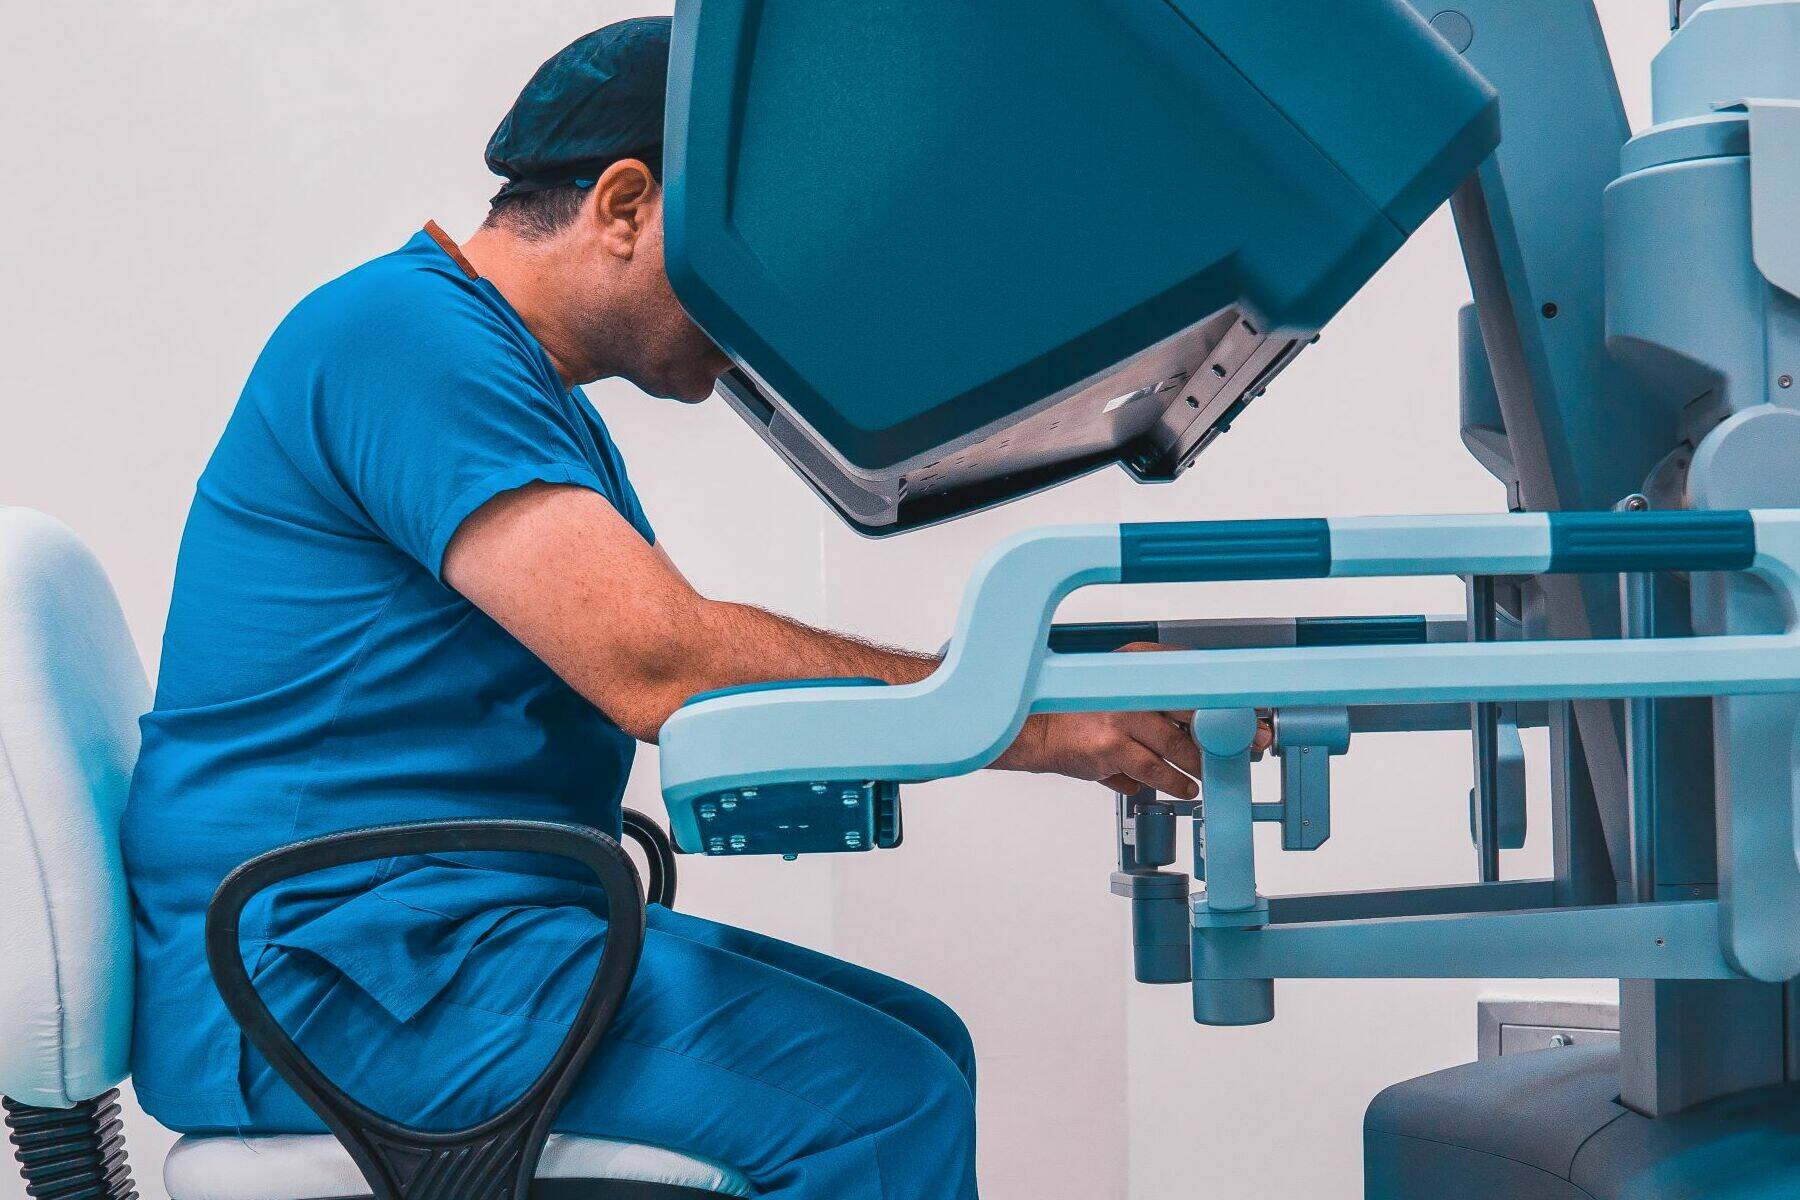 A surgeon sits at a robotics surgery console to perform an operation. Robotic surgeries are much less invasive, more precise and allow for a faster recovery time with less pain according to Fraser Health’s new program. (Getty Images)